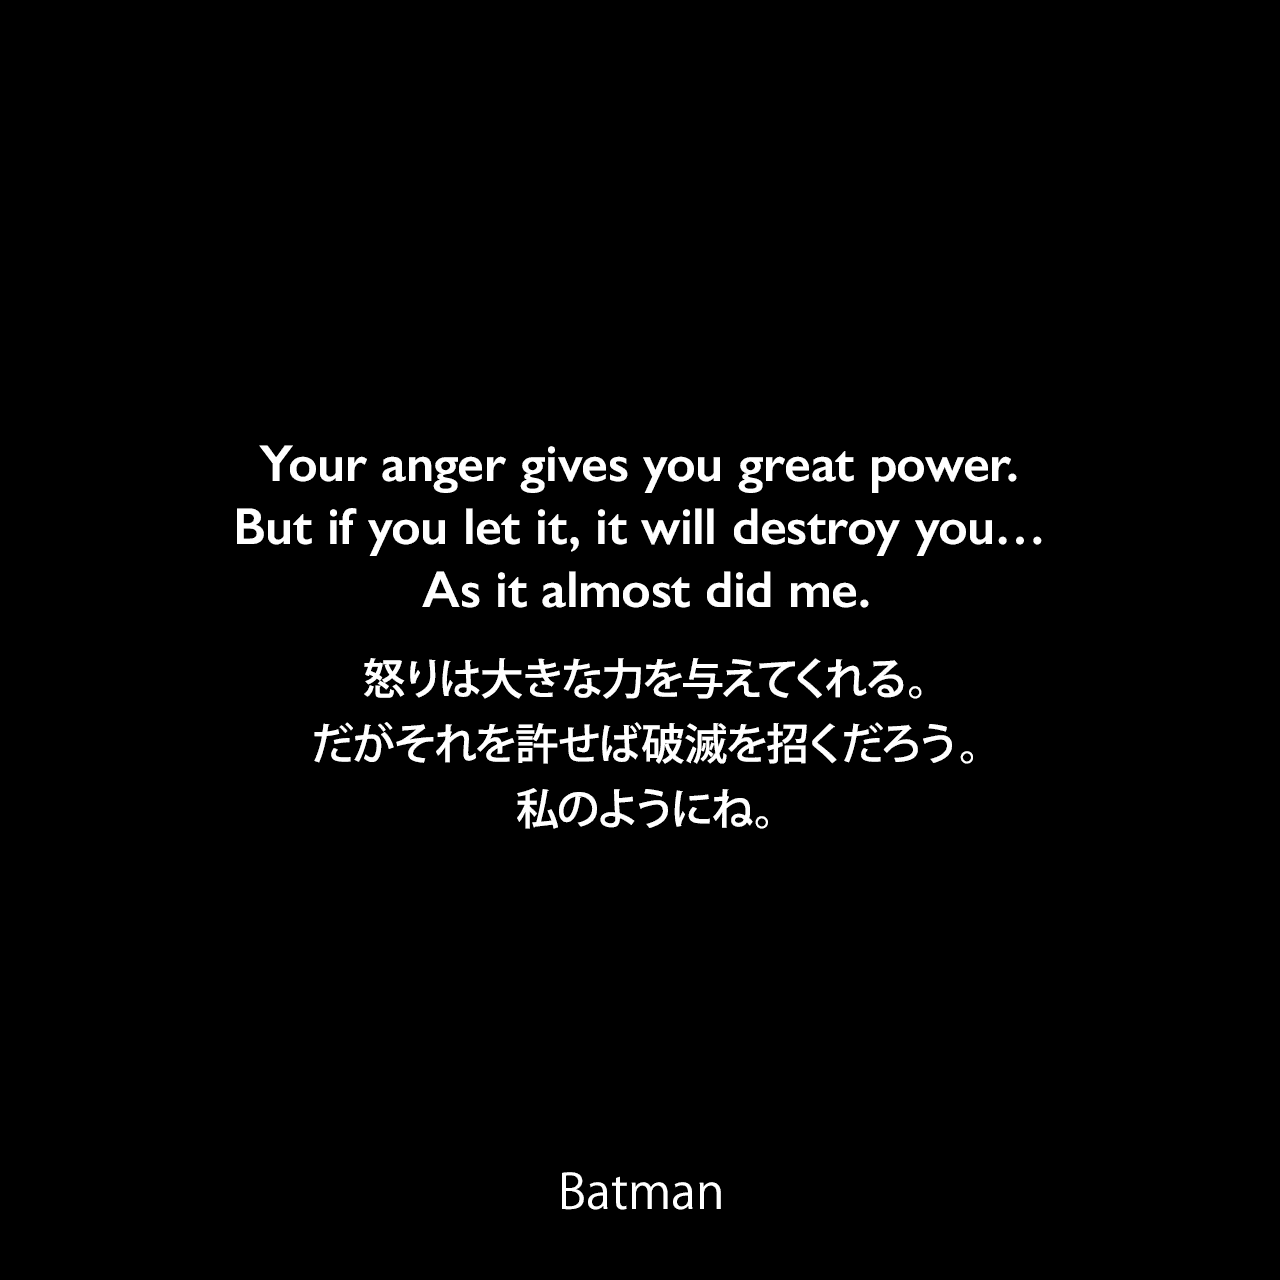 Your anger gives you great power. But if you let it, it will destroy you… As it almost did me.怒りは大きな力を与えてくれる。だがそれを許せば破滅を招くだろう。私のようにね。- Henri Ducard 